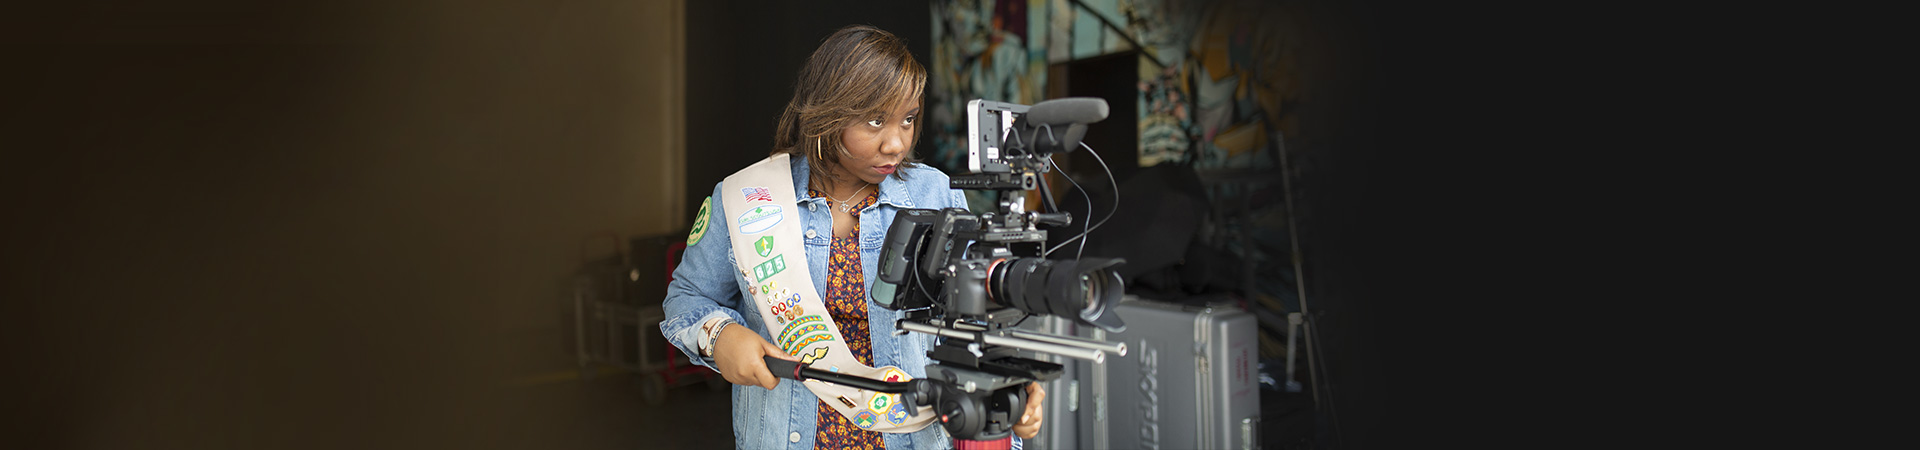  Ambassador Girl Scout operating a professional-looking movie camera on a tripod 